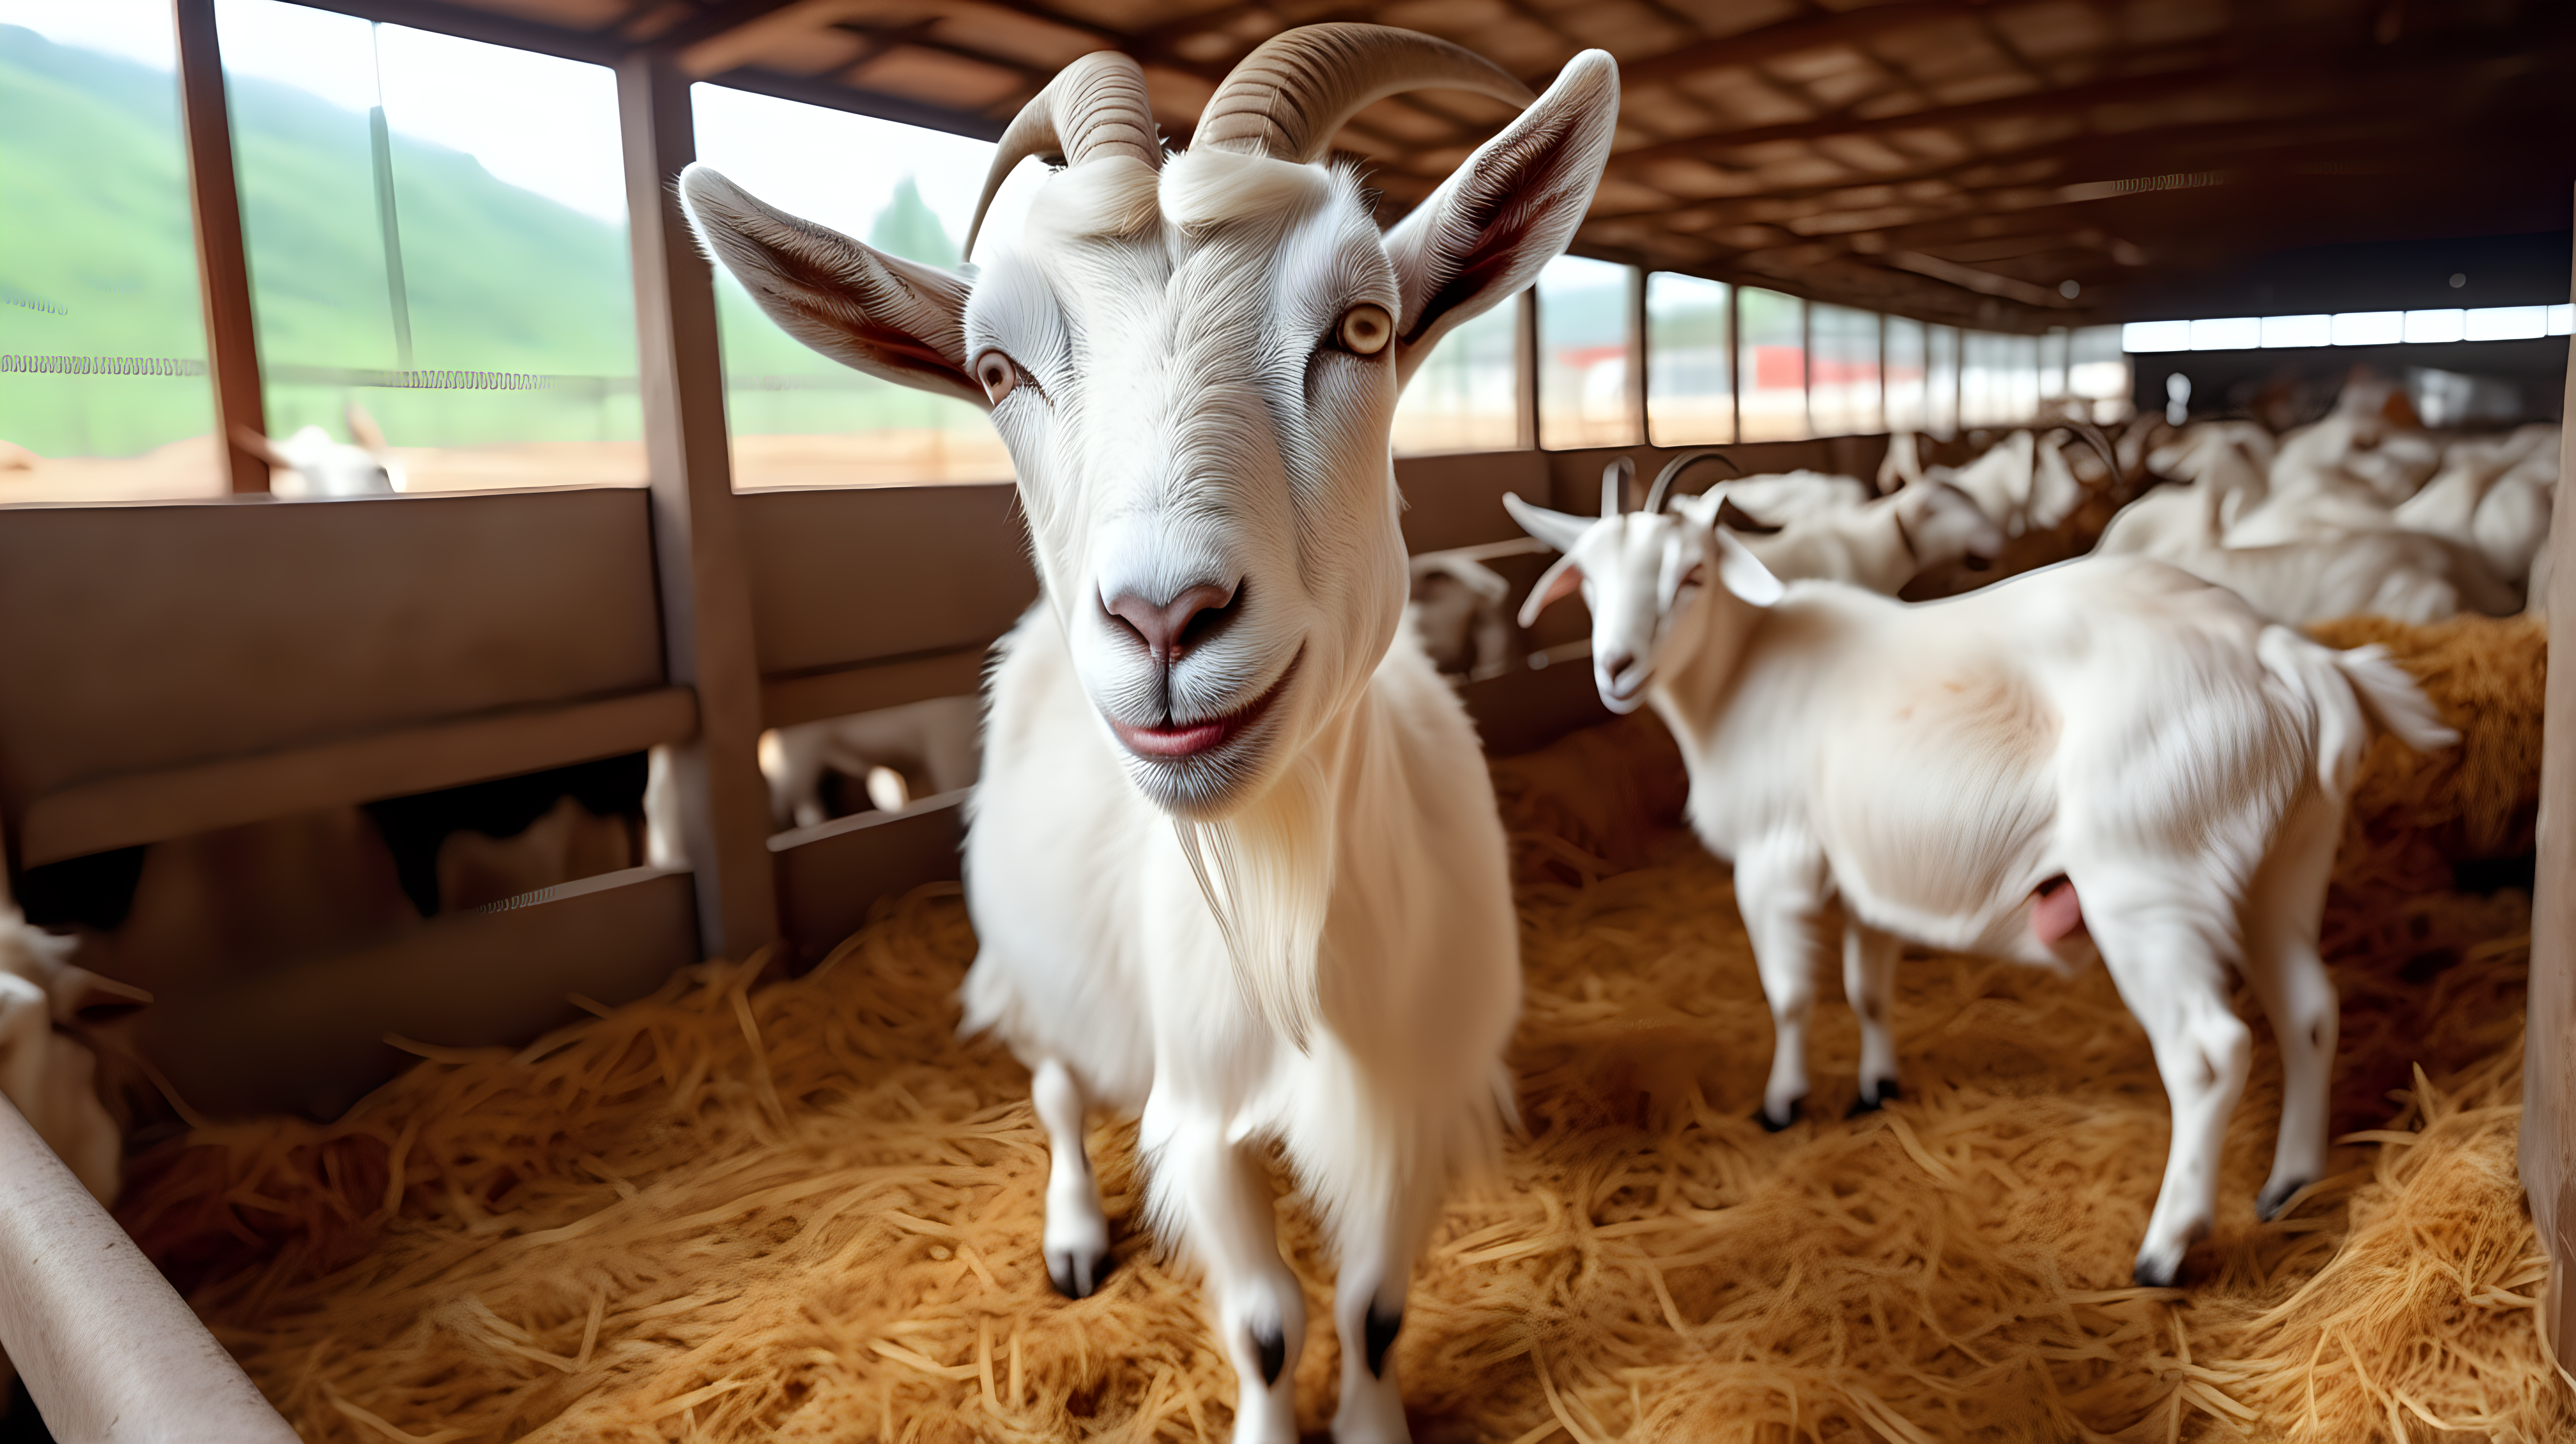 indoor modern goat farm with goat eat food in stable, close up goat